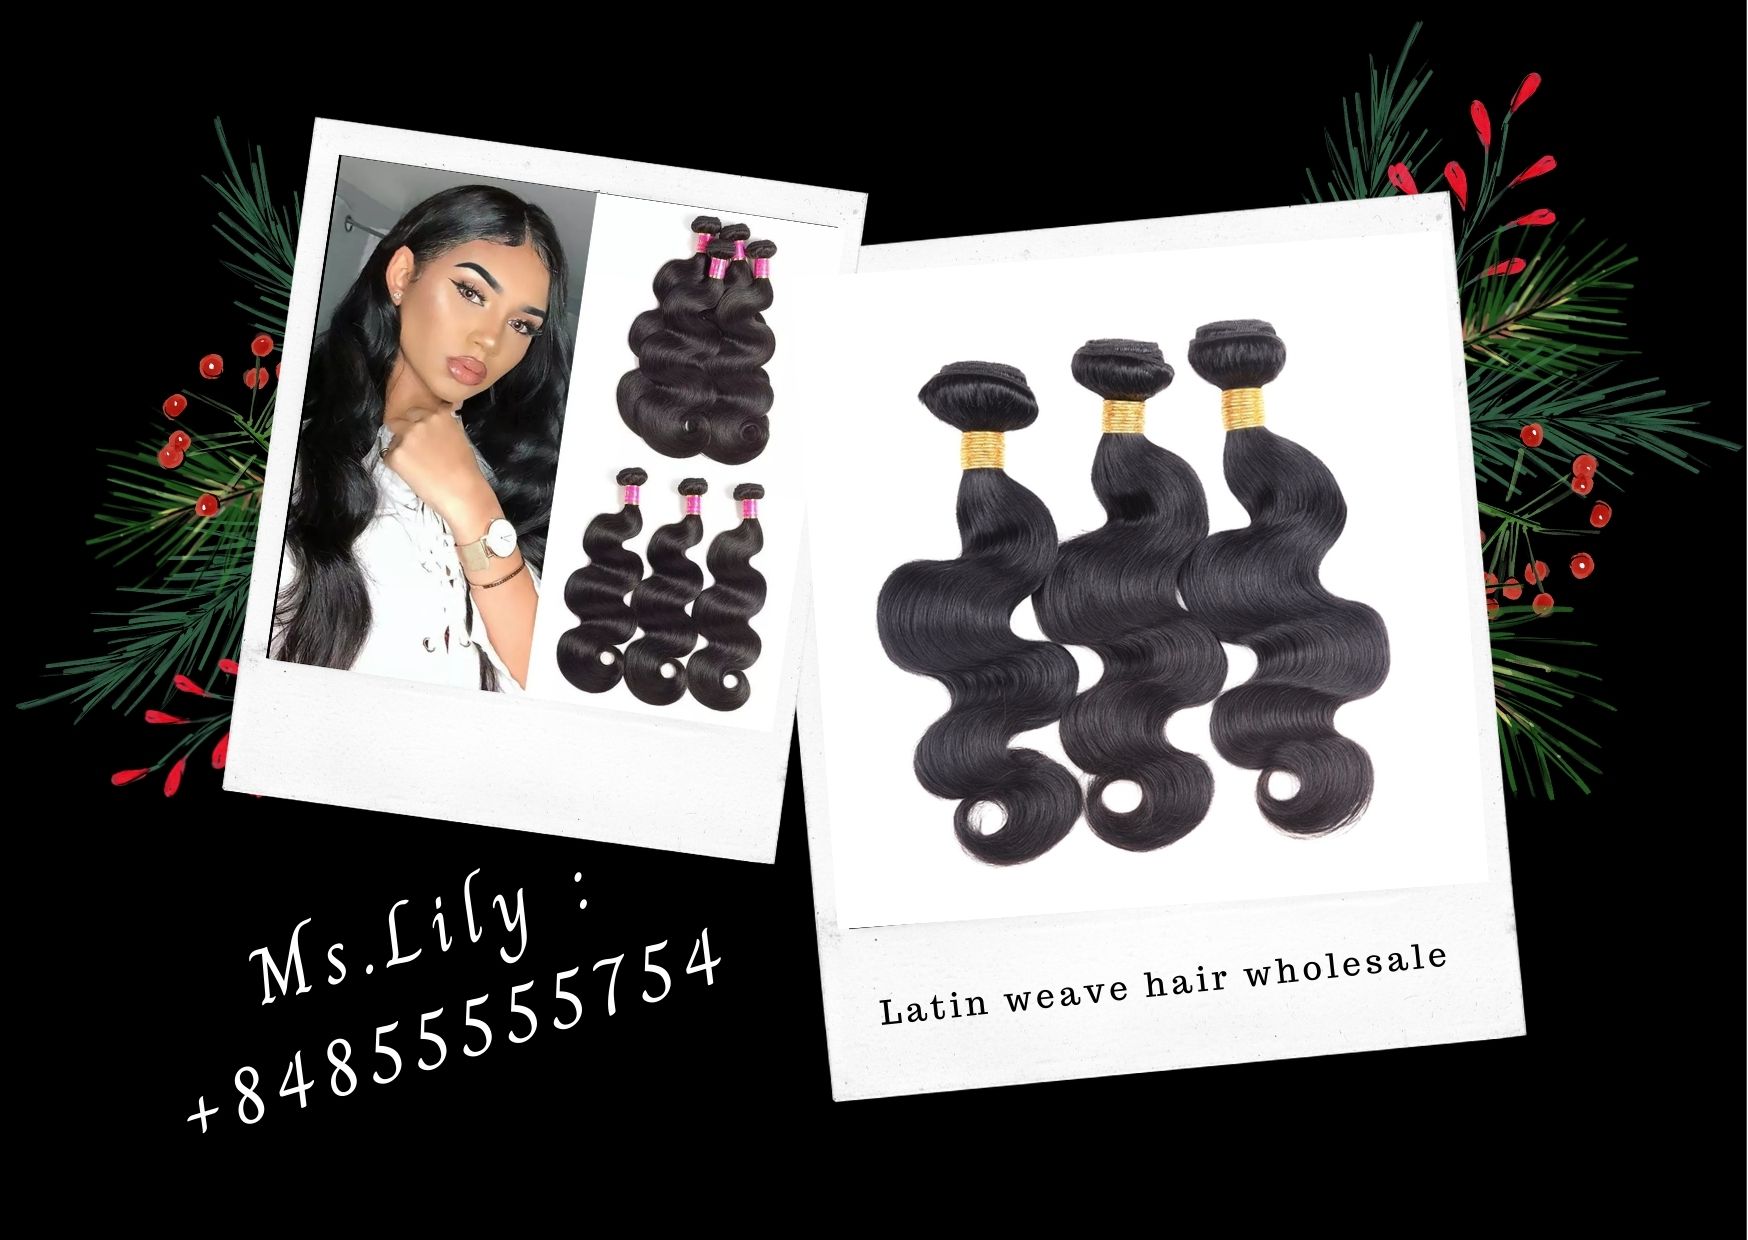 miami-wholesale-hair-vendors-the-market-is-growing-strongly-in-the-us